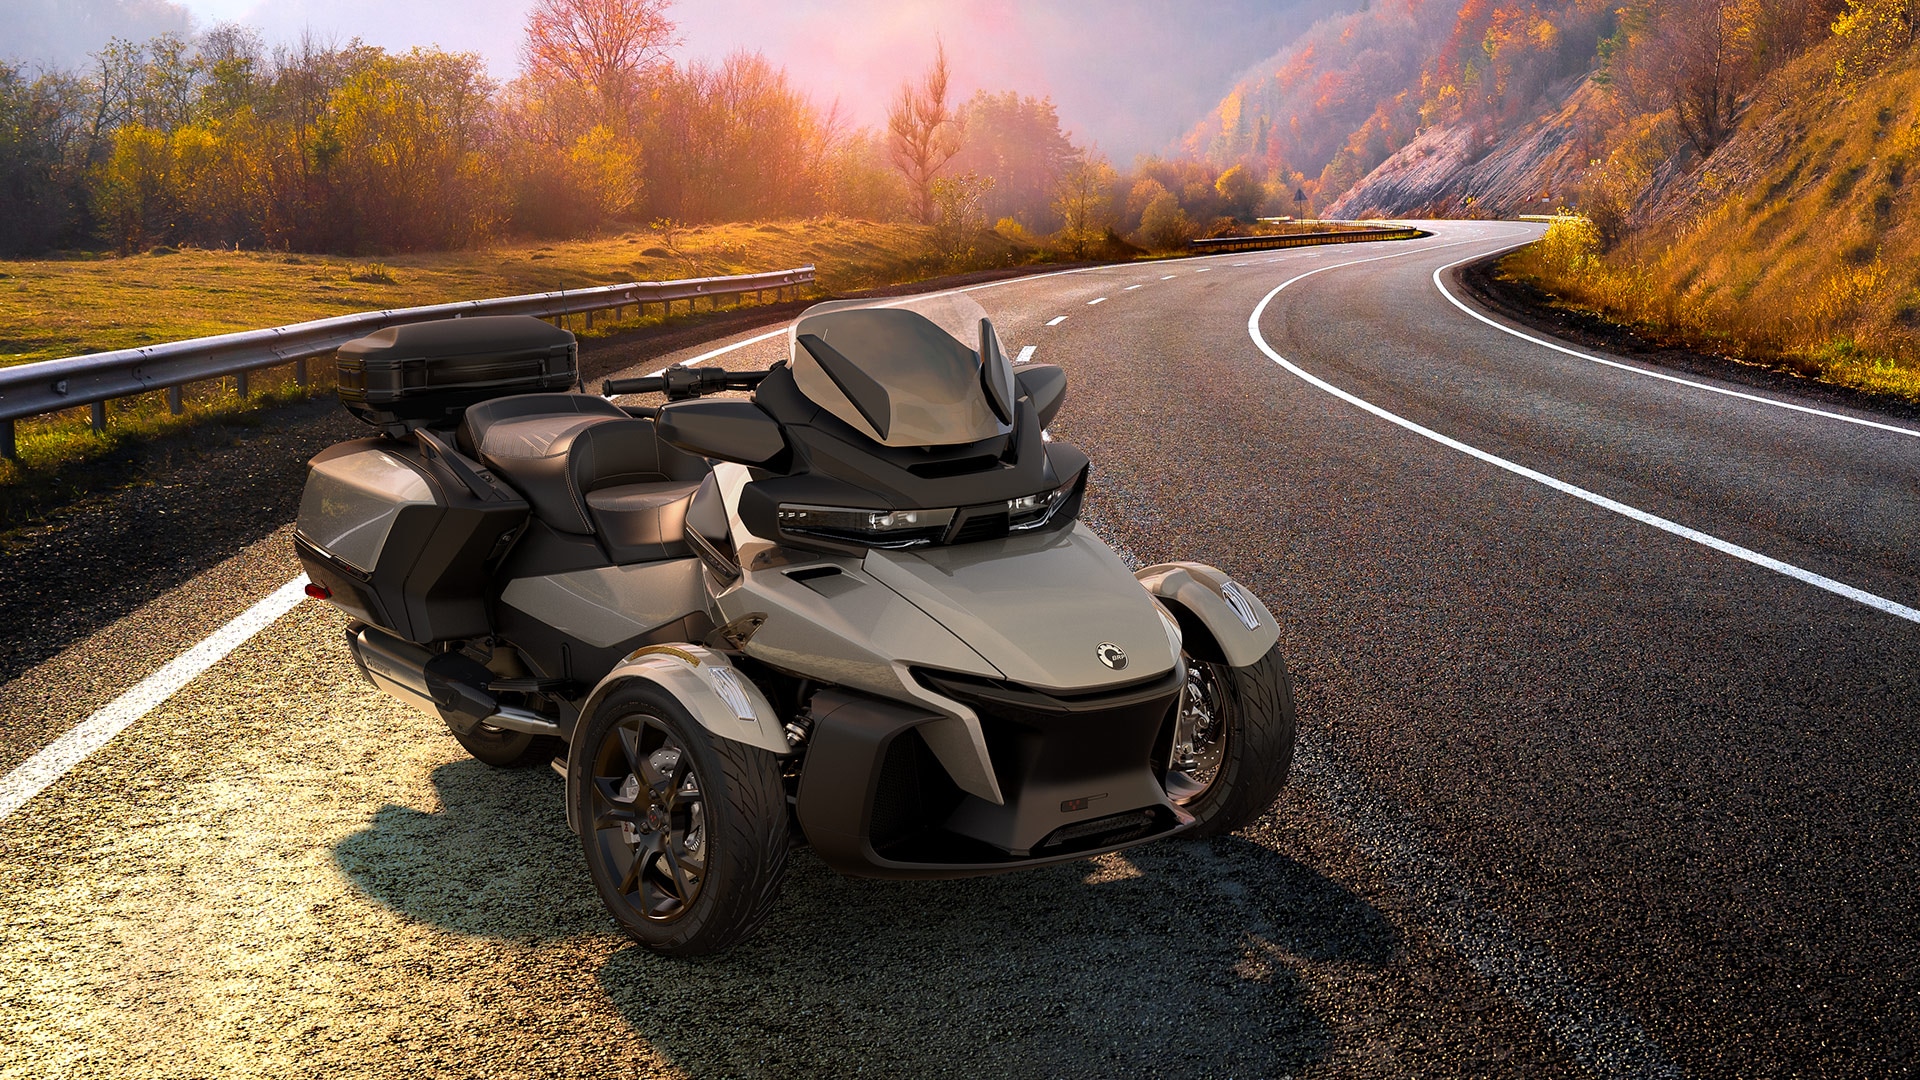 The Can-Am Spyder RT resting by the side of the road